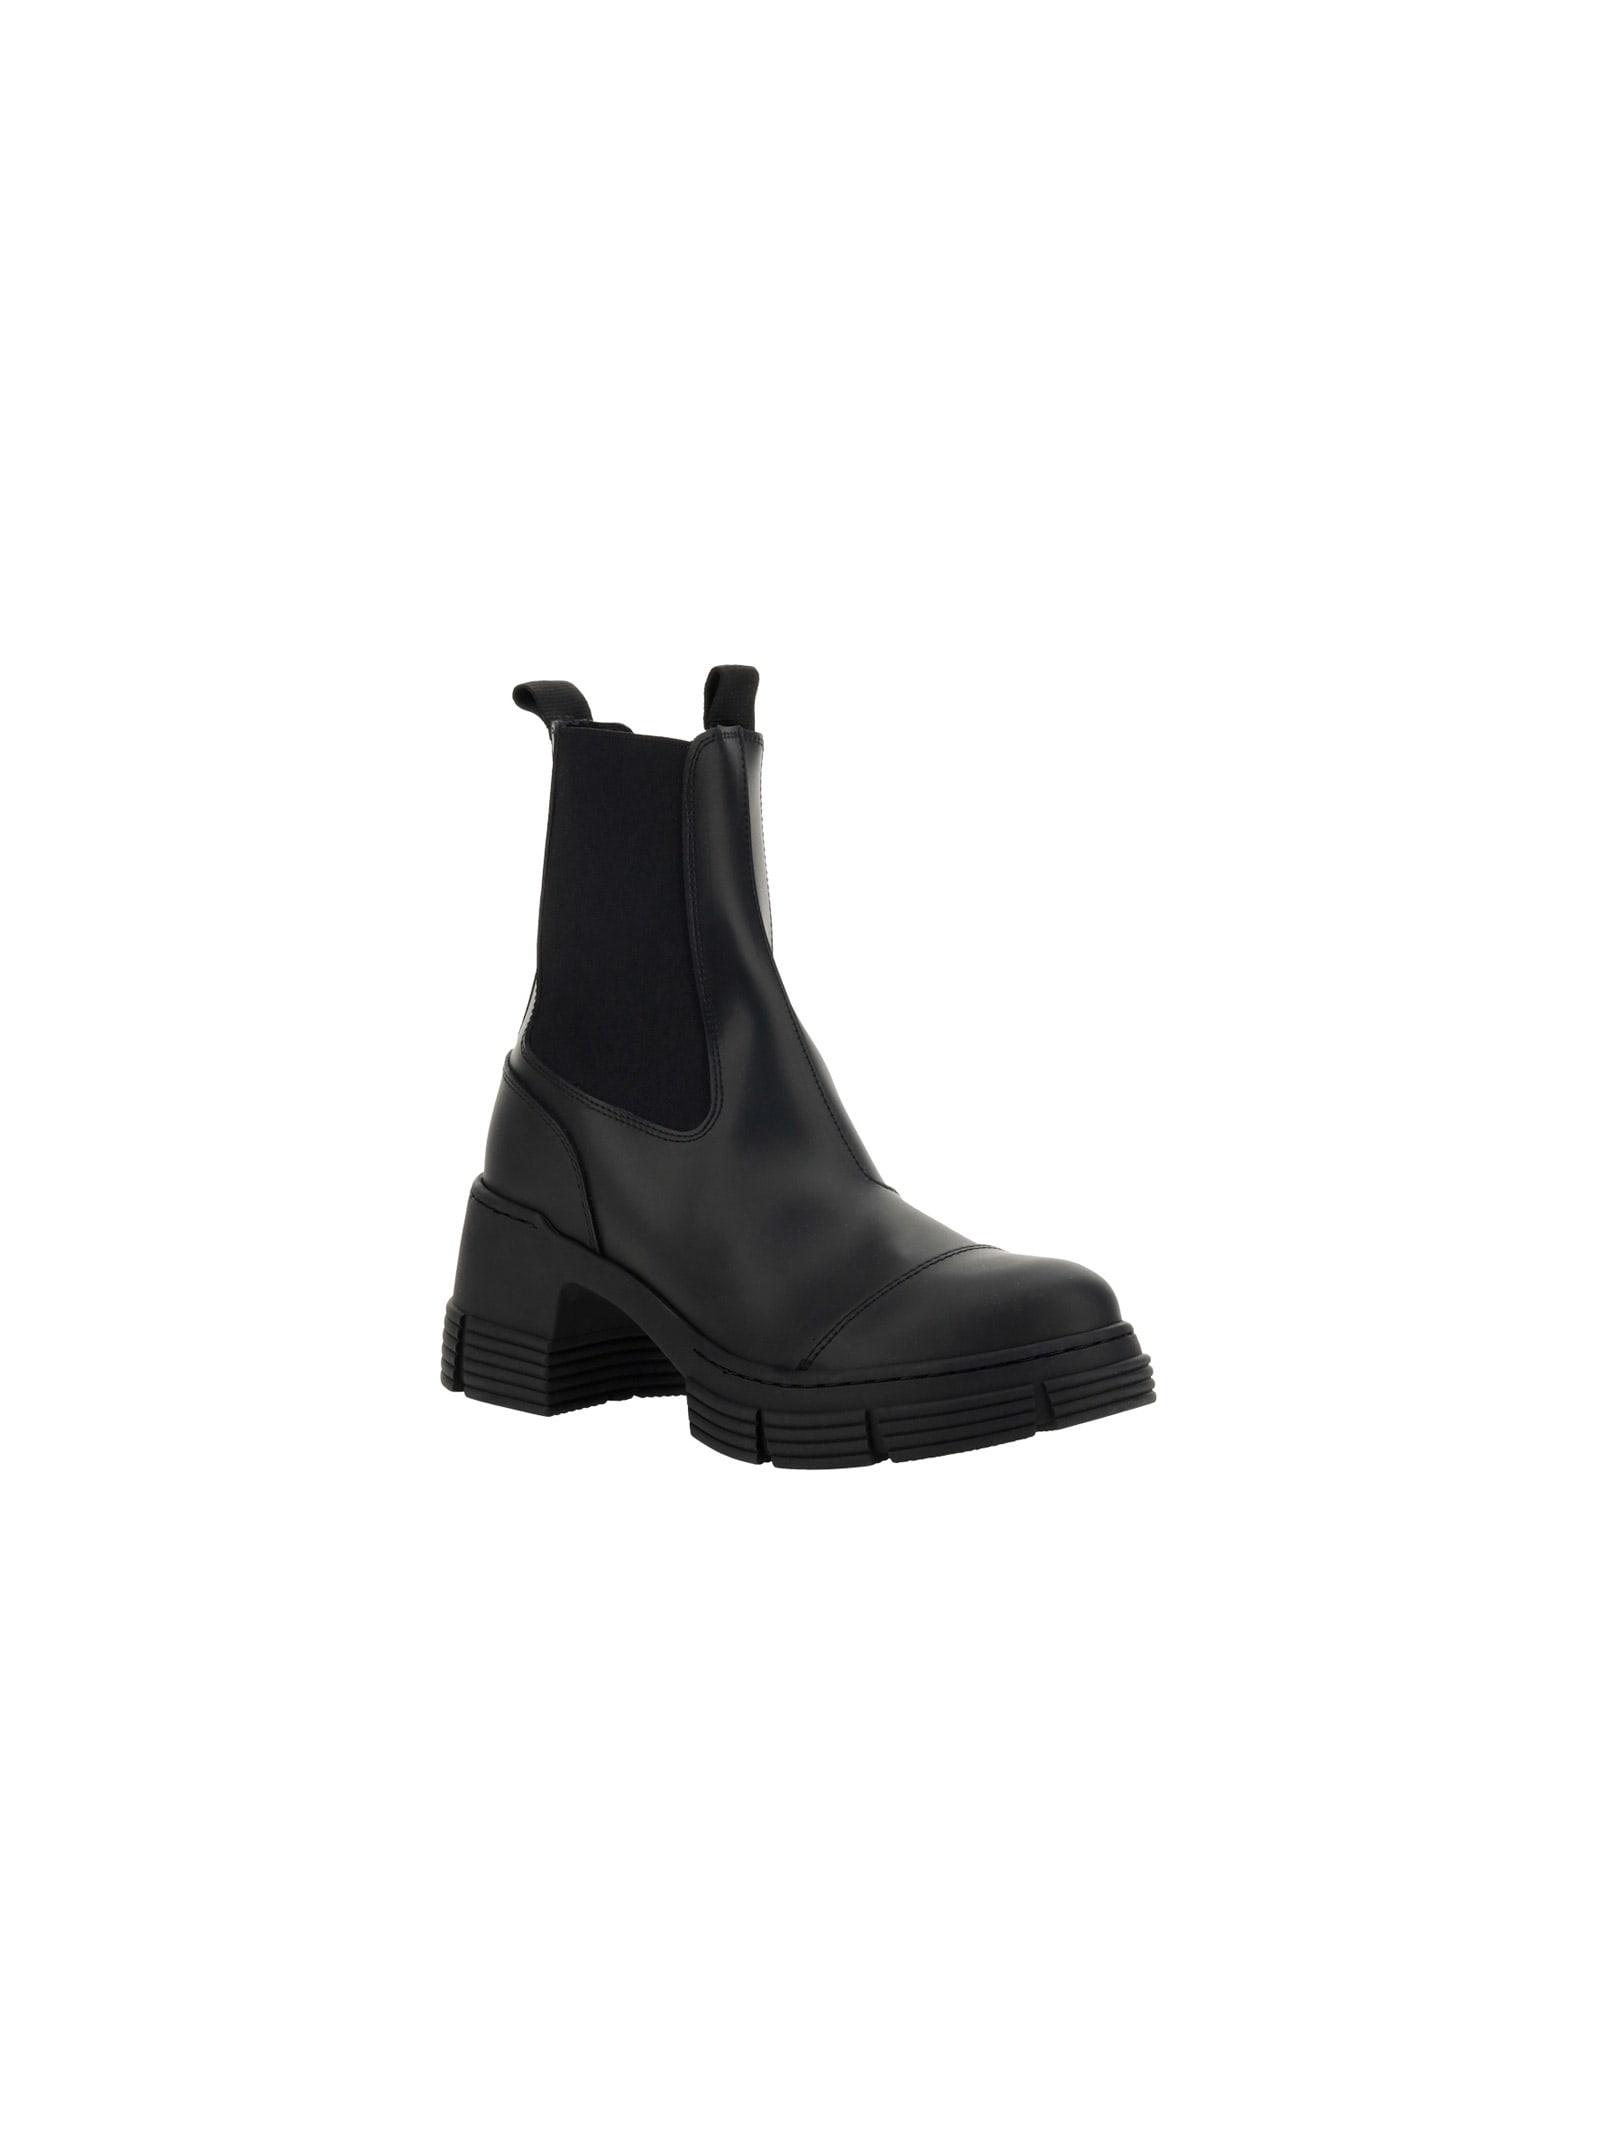 Ganni City Ankle Boots | italist